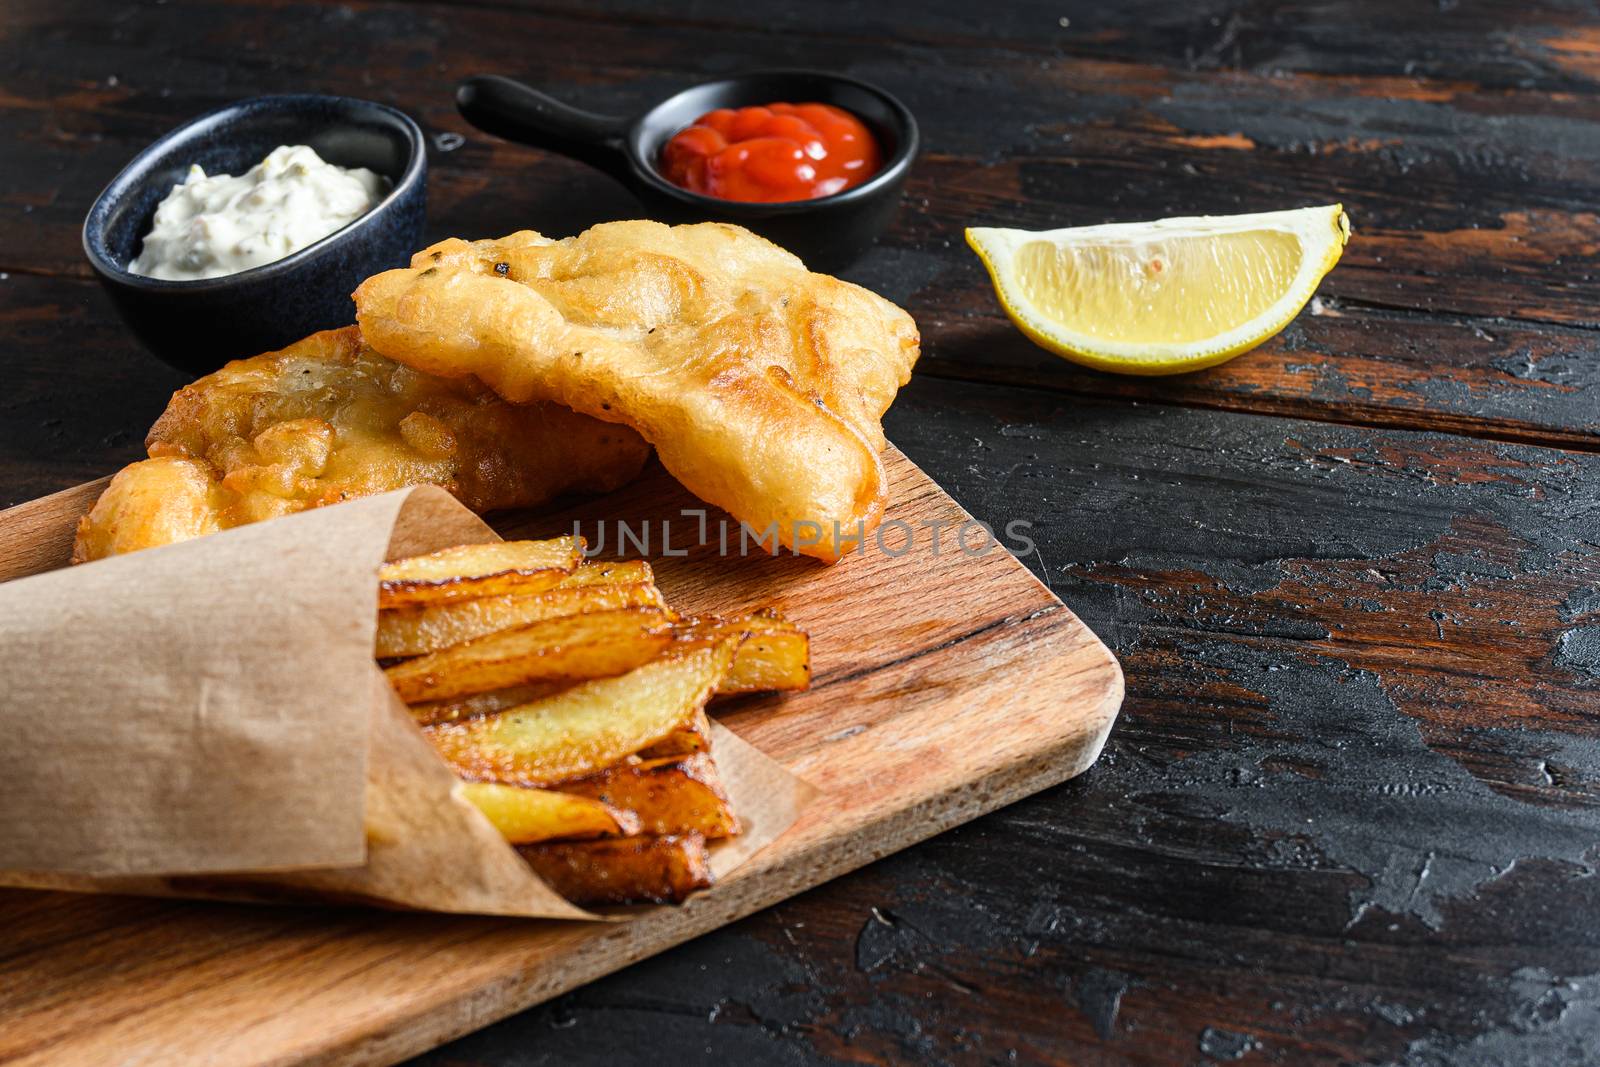 Fish and chips in a paper cone on wood chopping board dip and lemon - fried cod, french fries, lemon slices, tartar sauce, ketchup tomatoe and with mushy peas served in the Pub or Restaurant over old wooden planks dark table side view close up space for text.